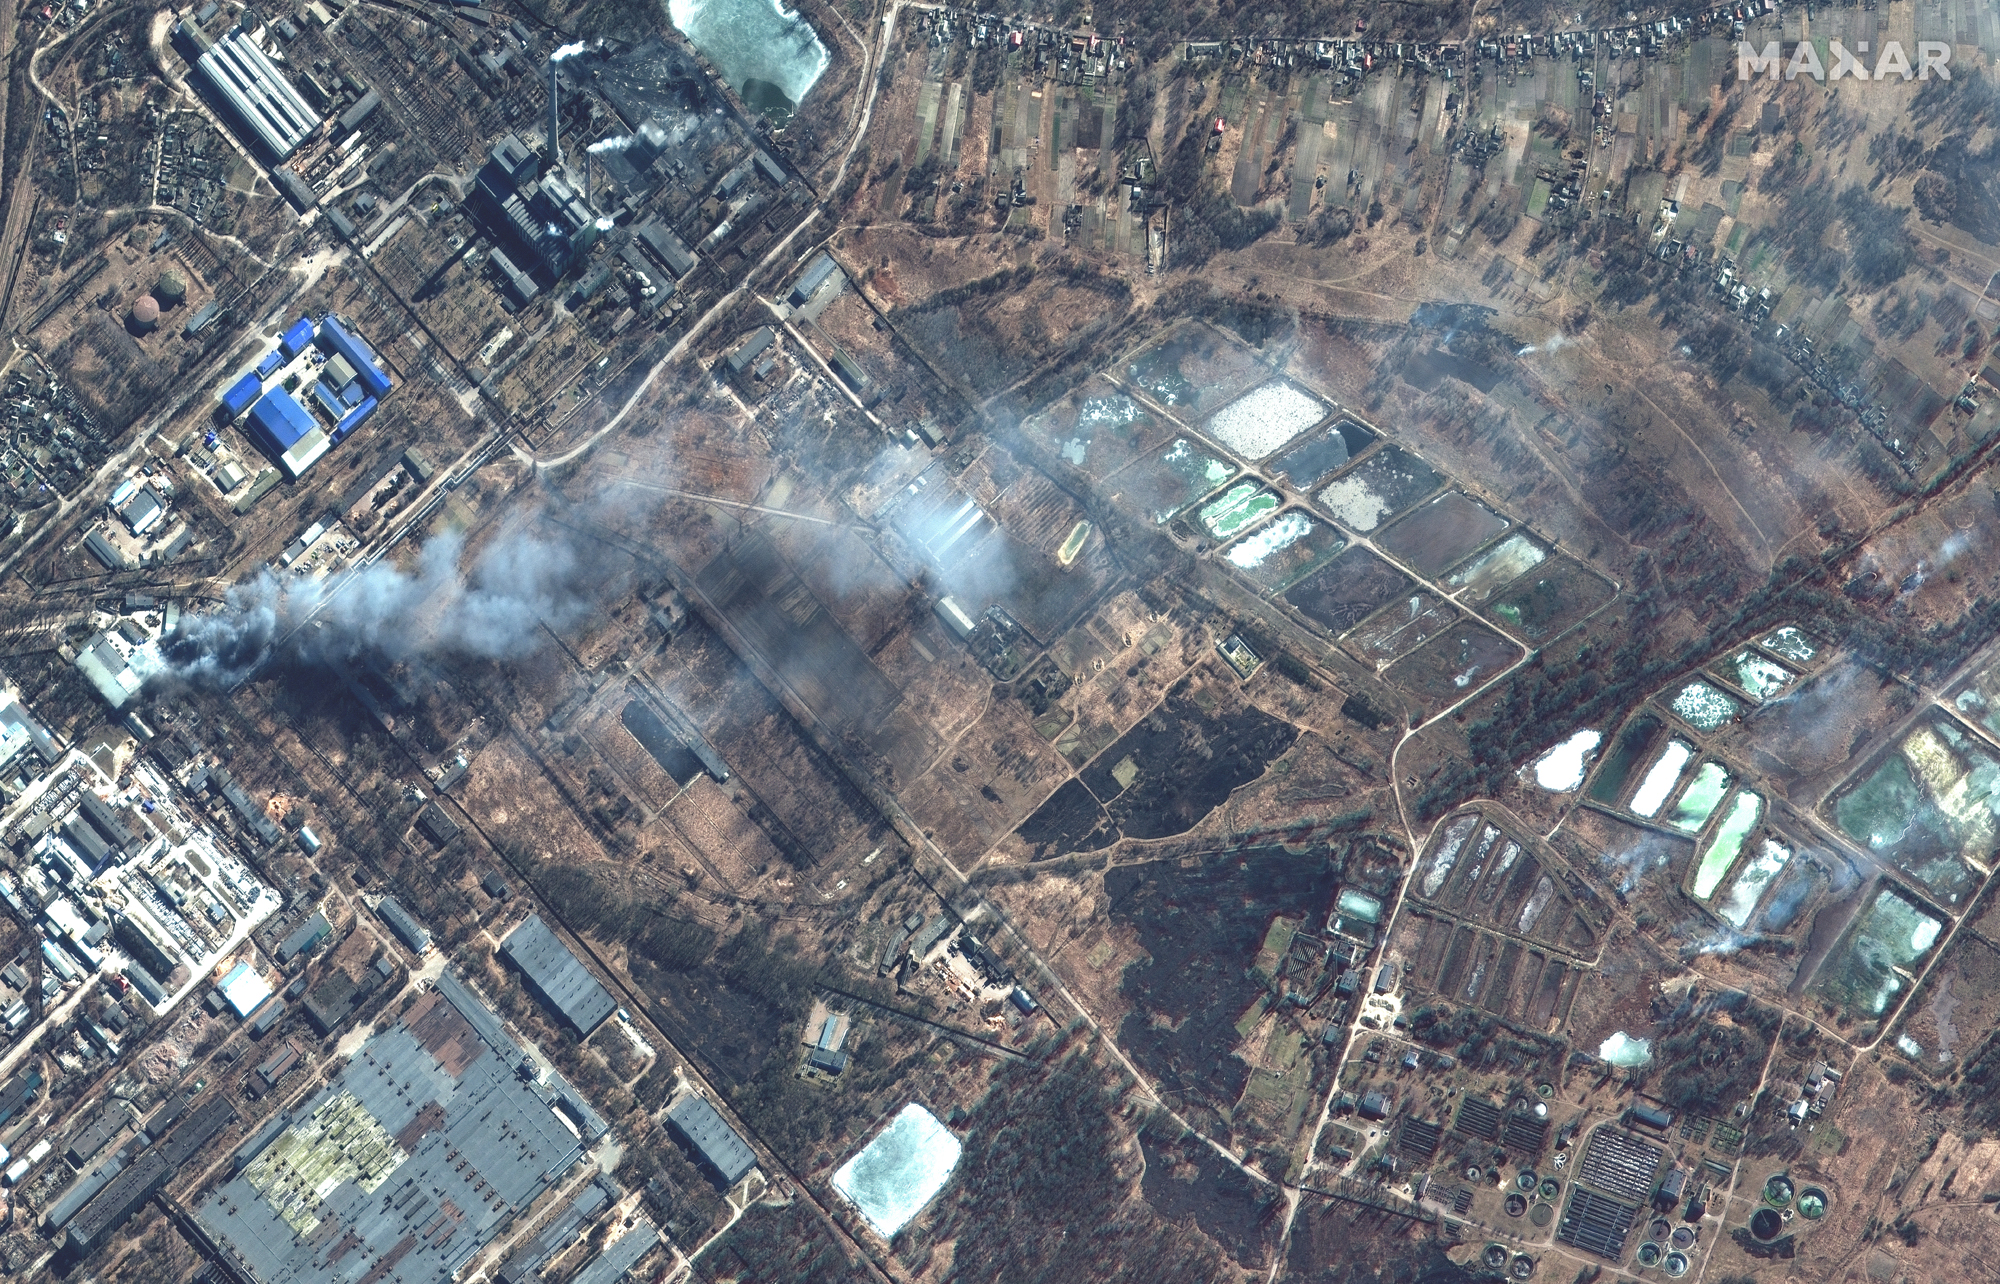 An overview of fires in an industrial area of southern Chernihiv, Ukraine amid fighting with Russian forces on March 10, 2022.